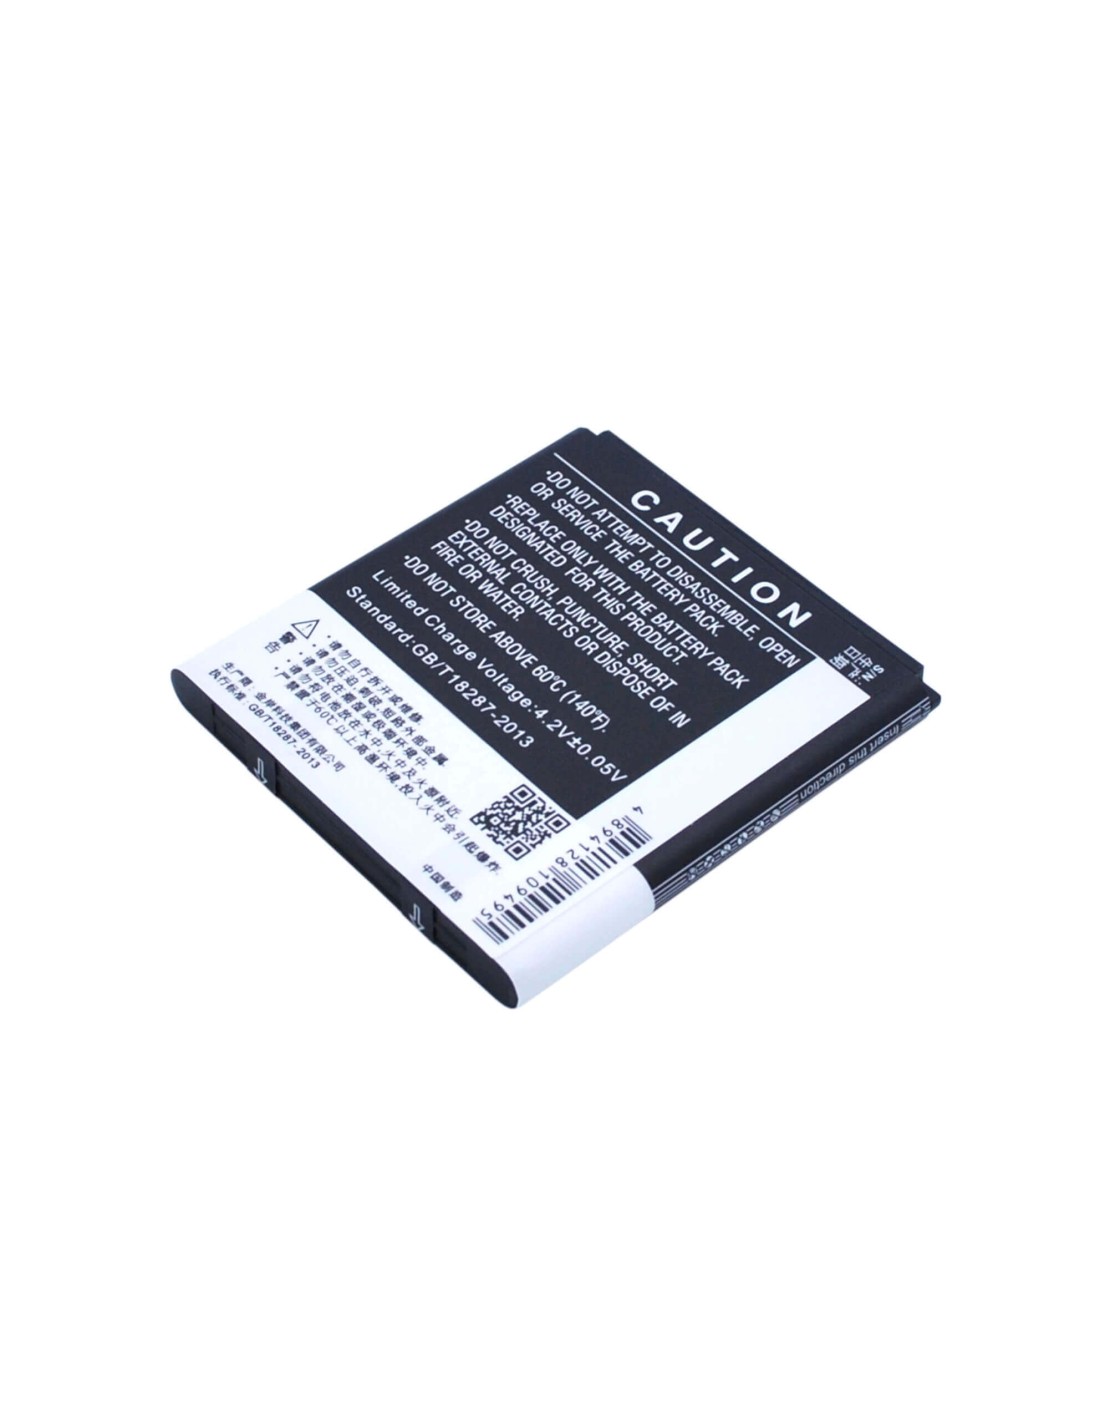 Battery for Coolpad 5211, 5108, 5109 3.7V, 1500mAh - 5.55Wh